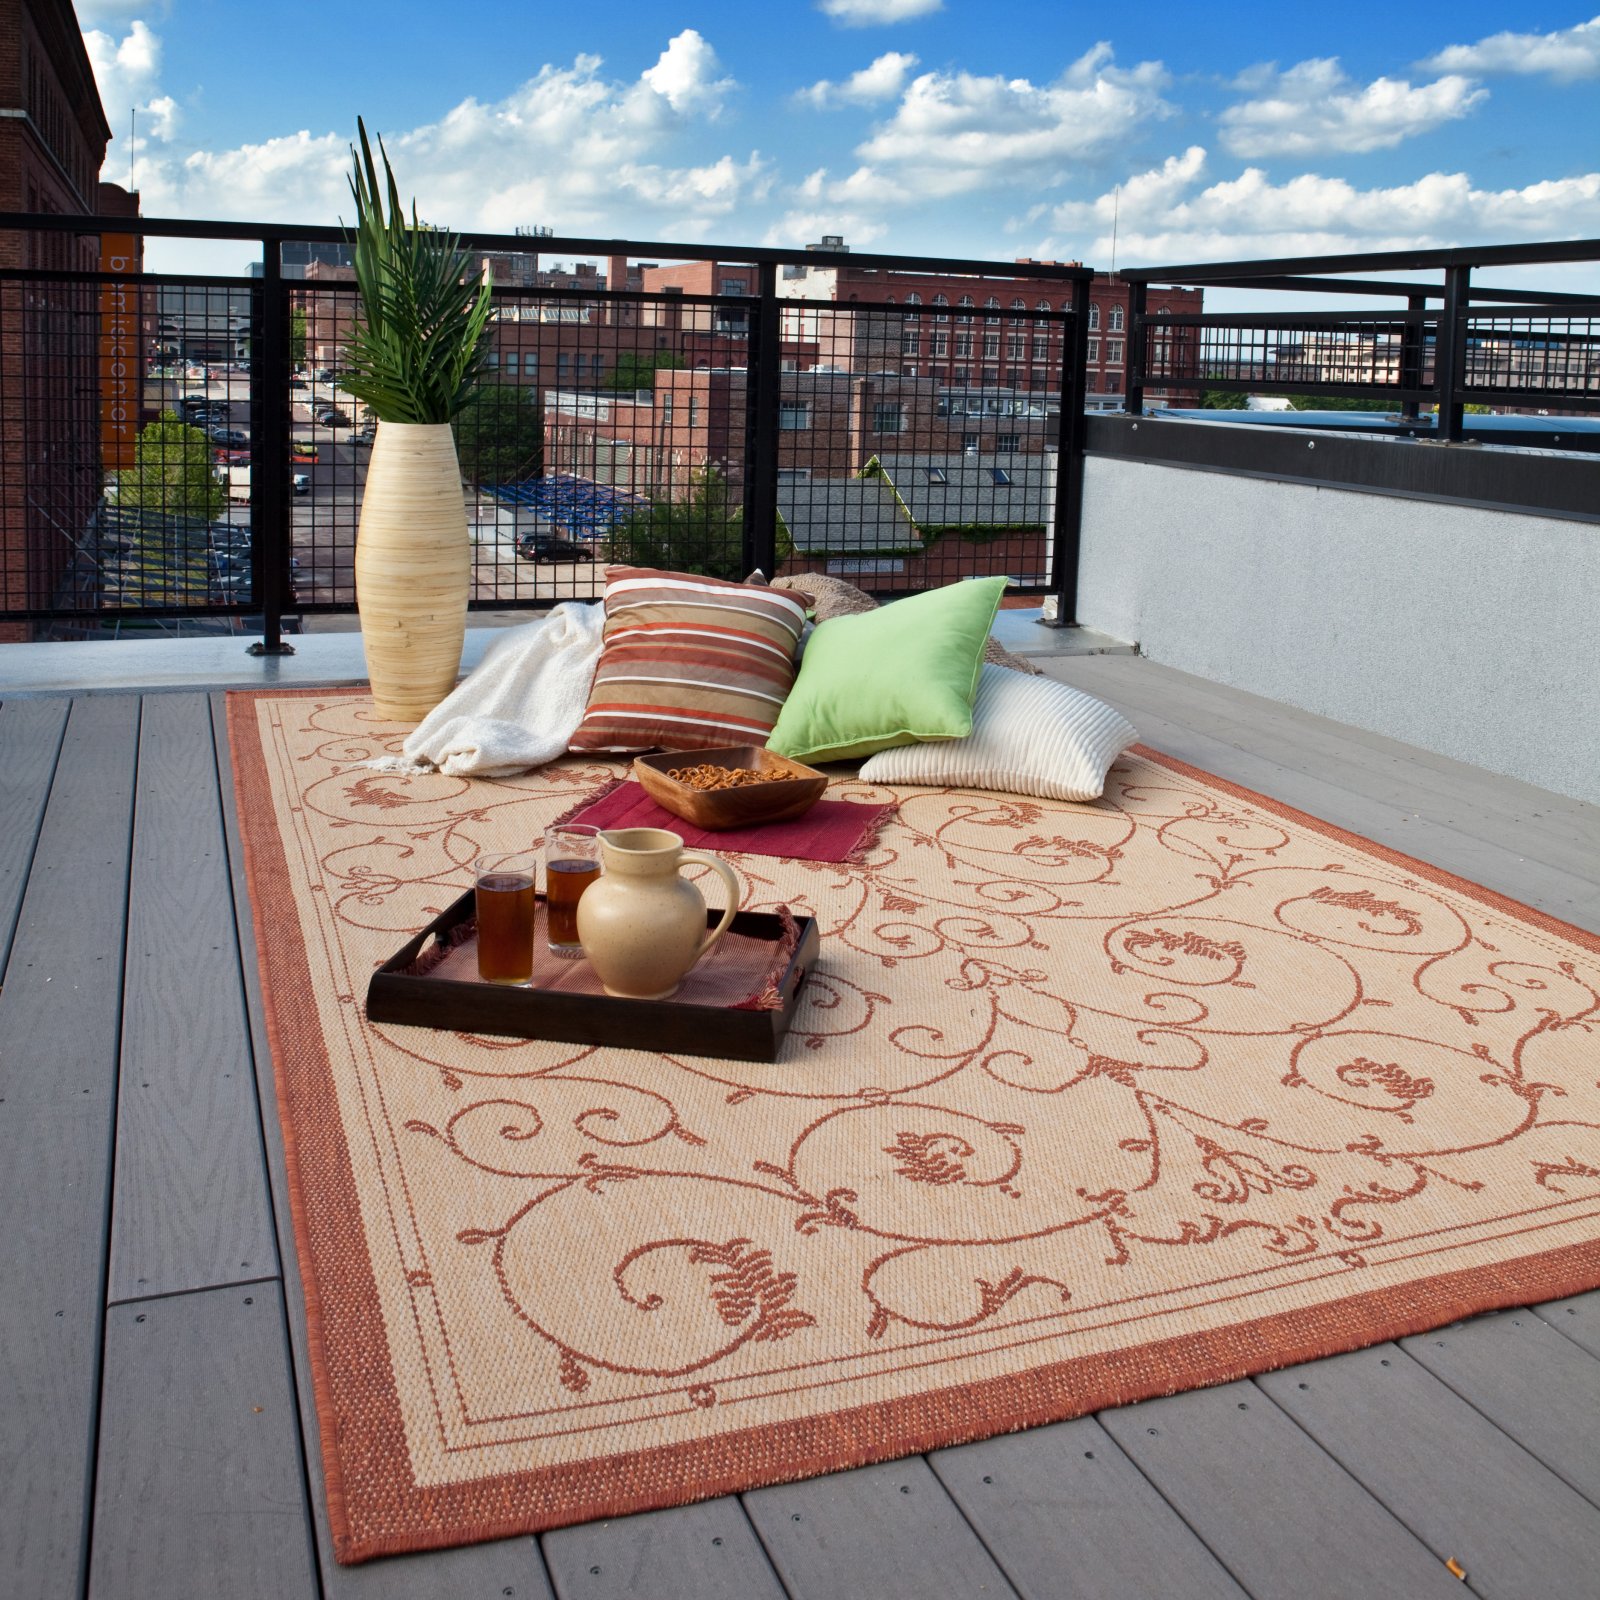 Cozy ... Flower Outdoor Rugs For Patios ... outdoor rugs for decks and patios